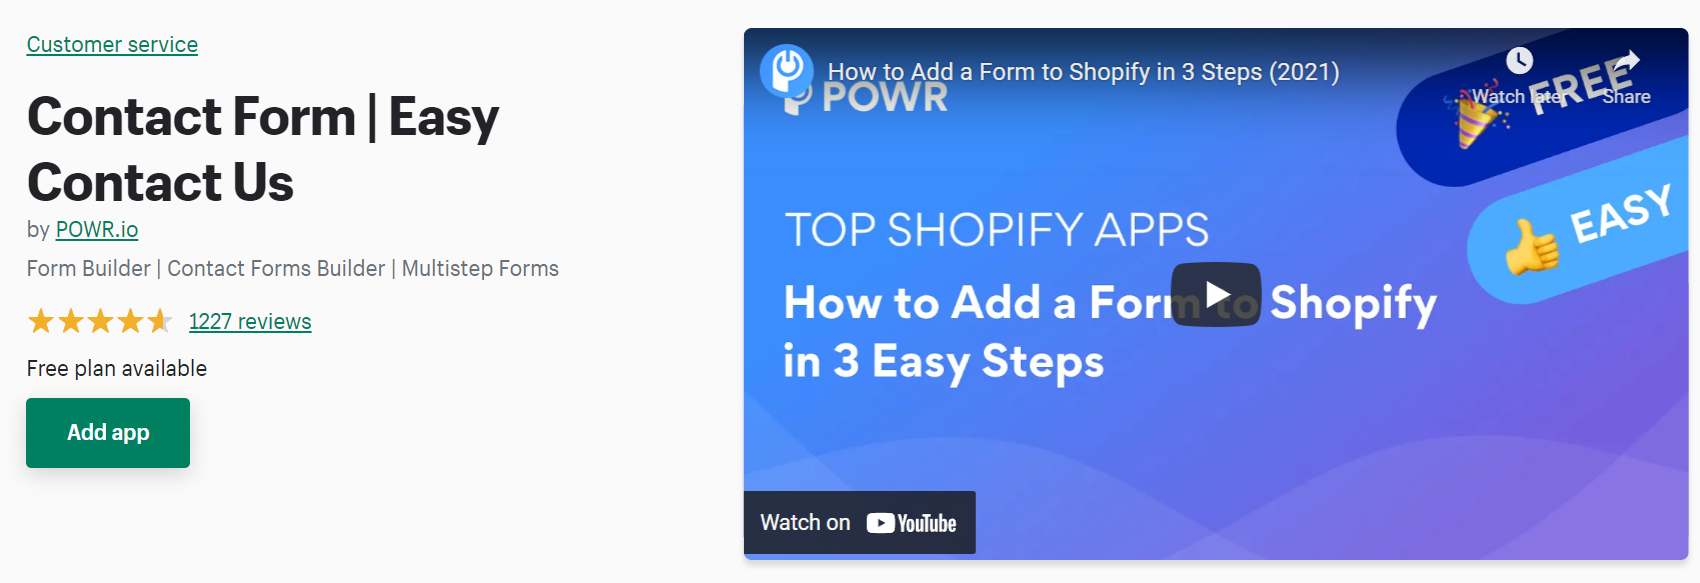 Contact form for Shopify